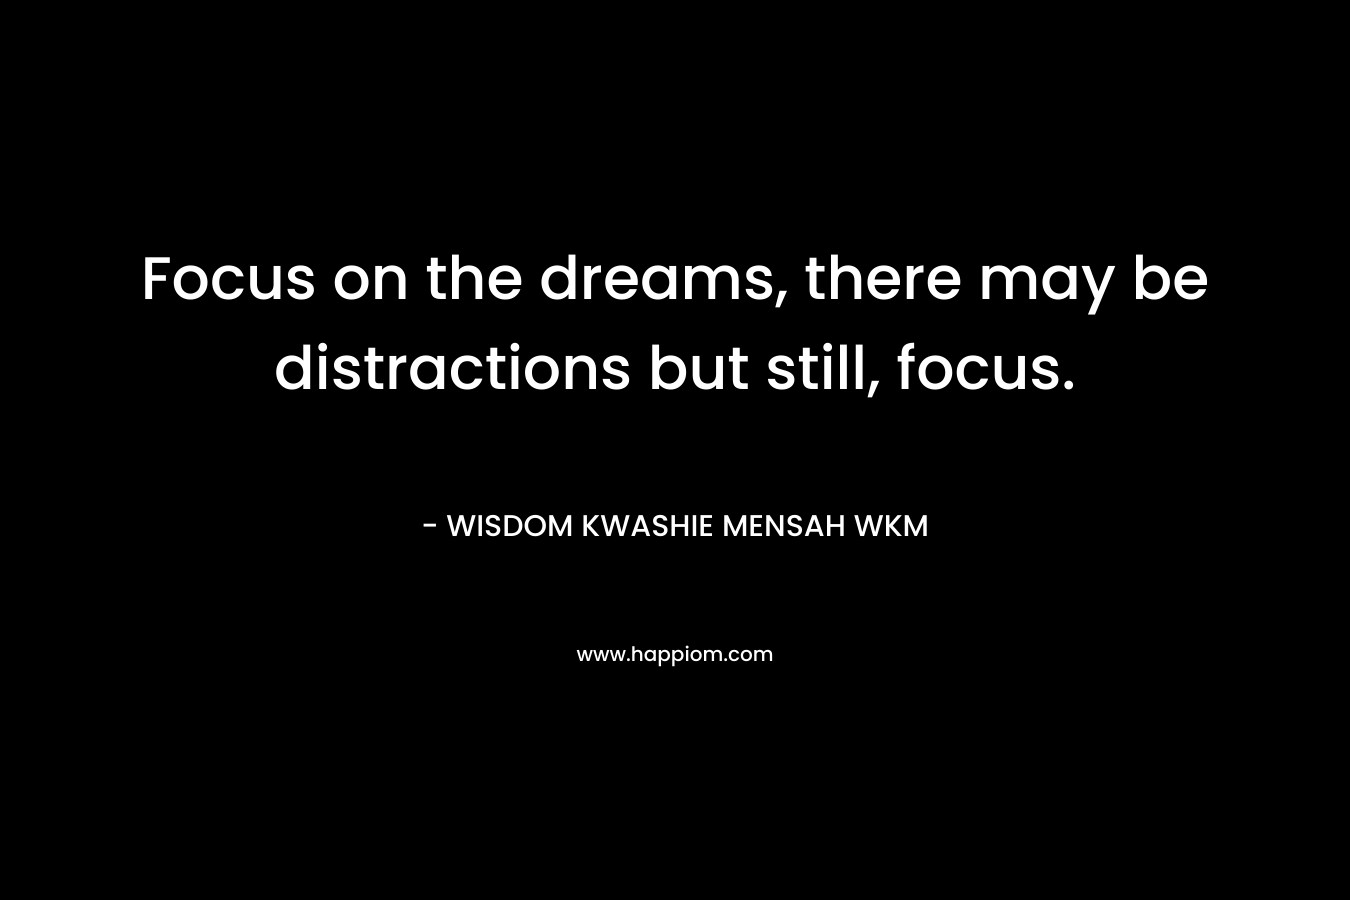 Focus on the dreams, there may be distractions but still, focus.